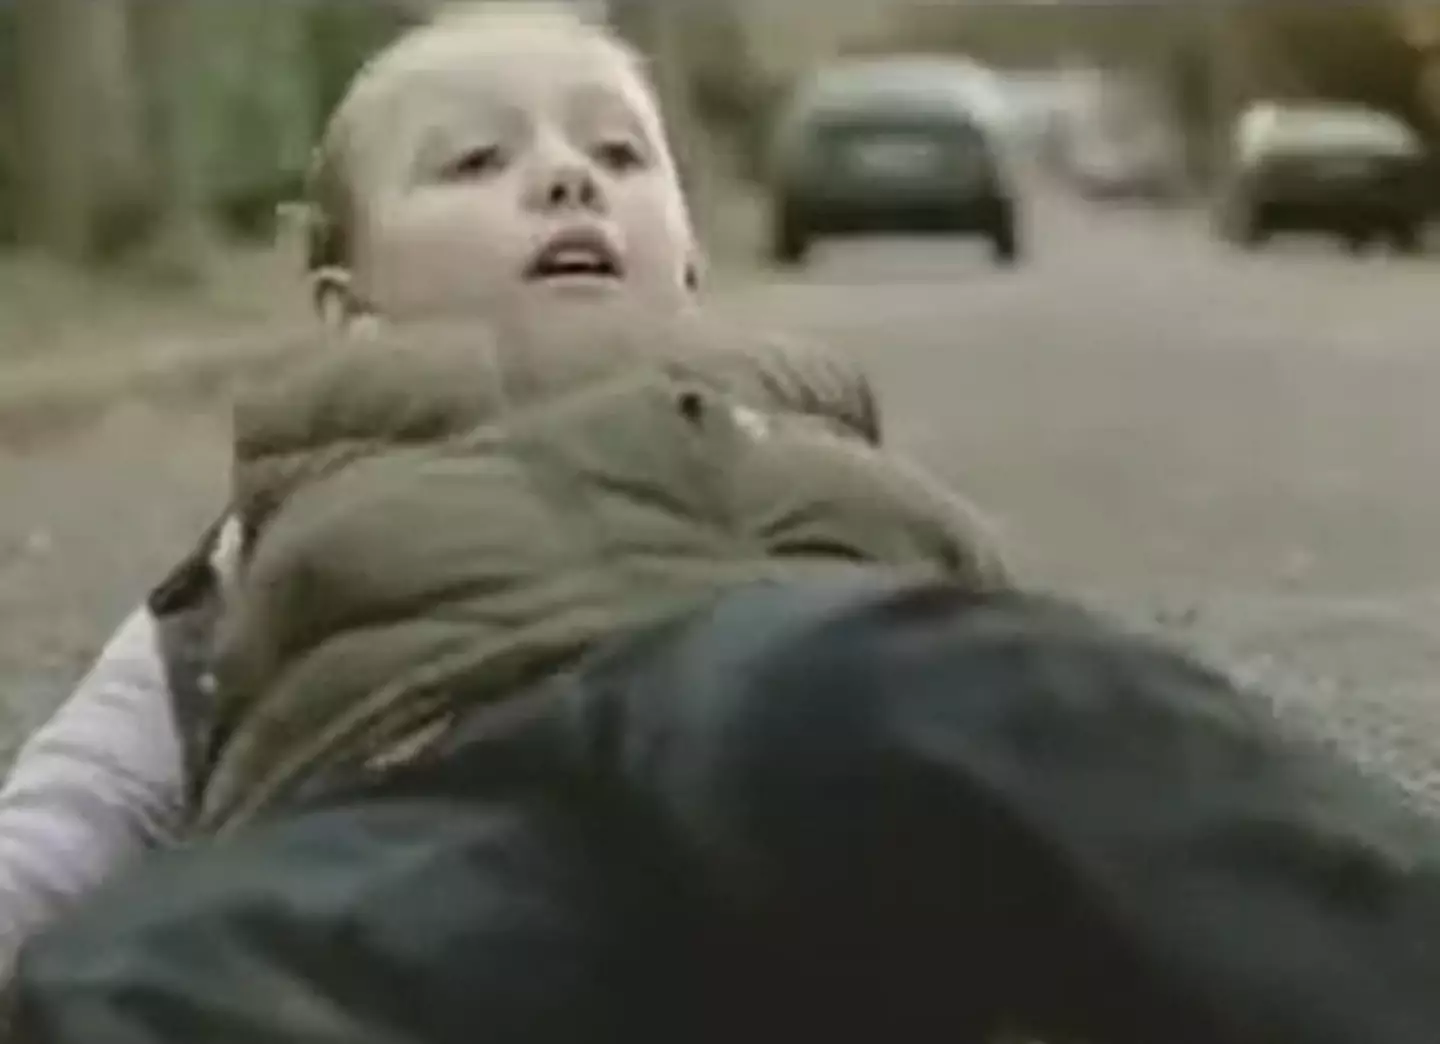 The advert has a somewhat happy ending as the little girl is alive thanks to the driver running her over at 30mph instead of 40mph.